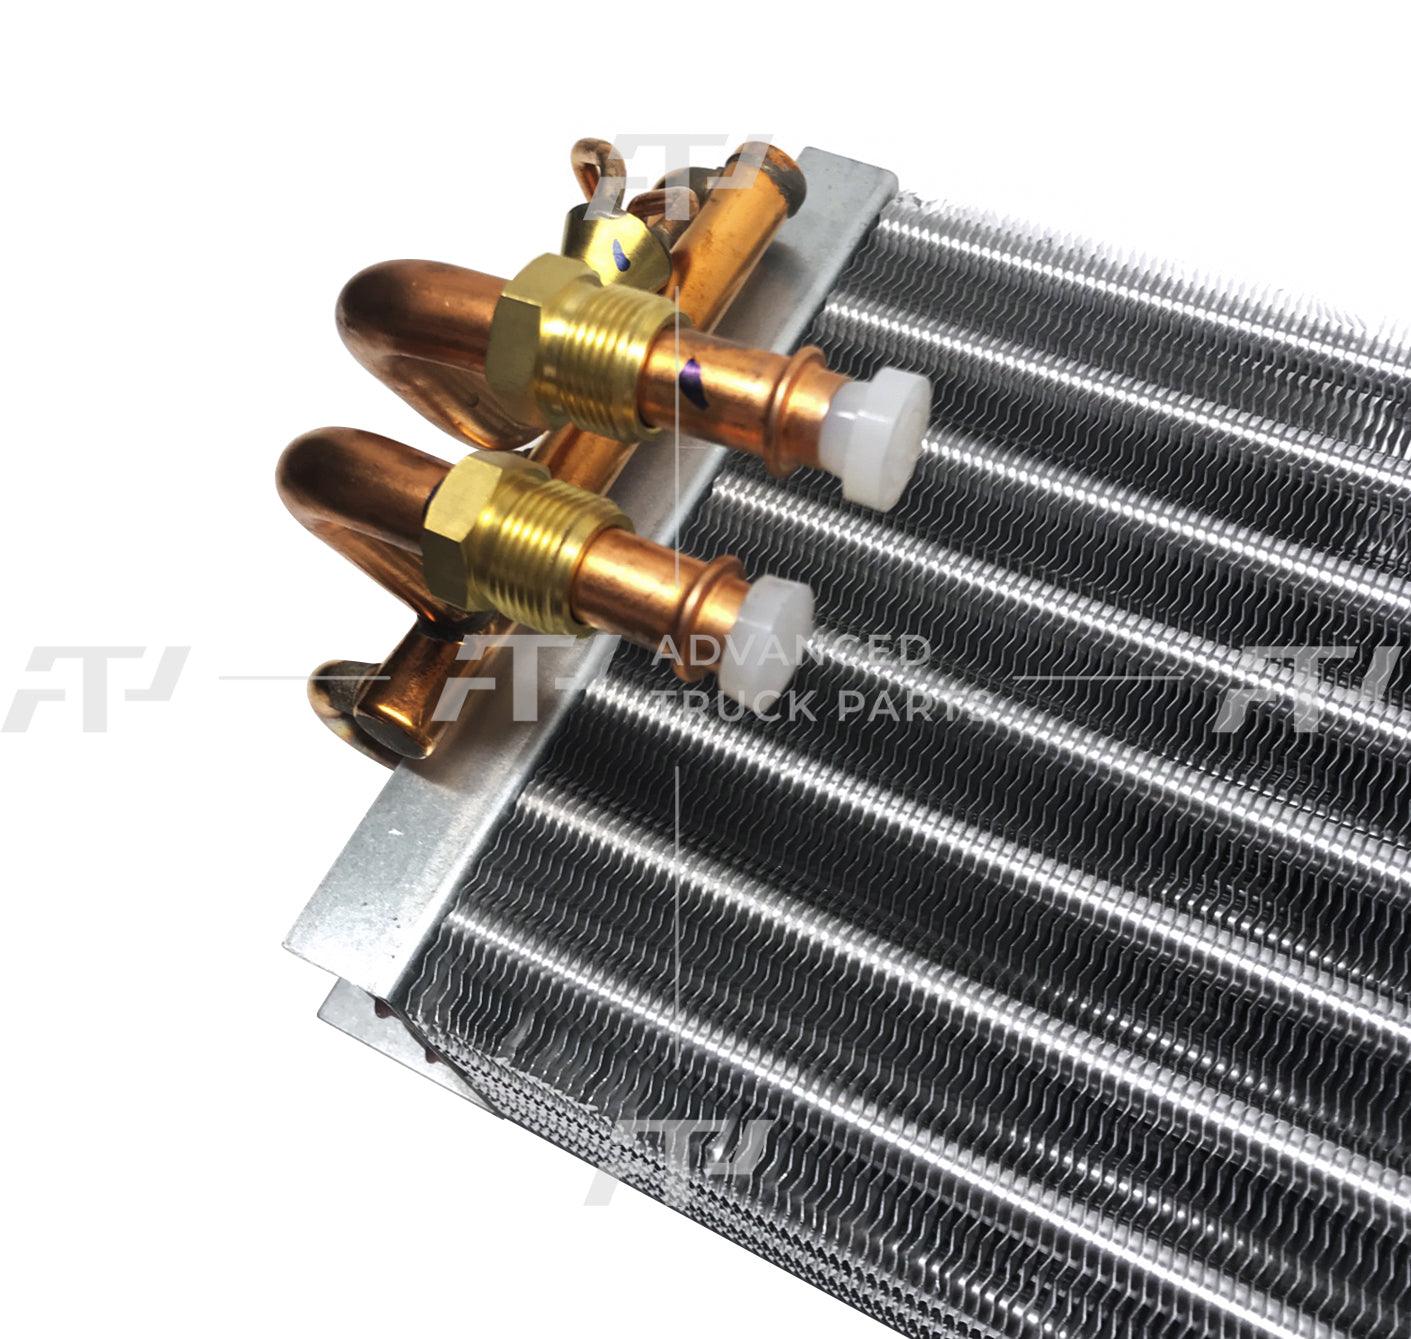 Sr2000012 Genuine Paccar® Evaporator Air Conditioner A/C For Kenworth - ADVANCED TRUCK PARTS